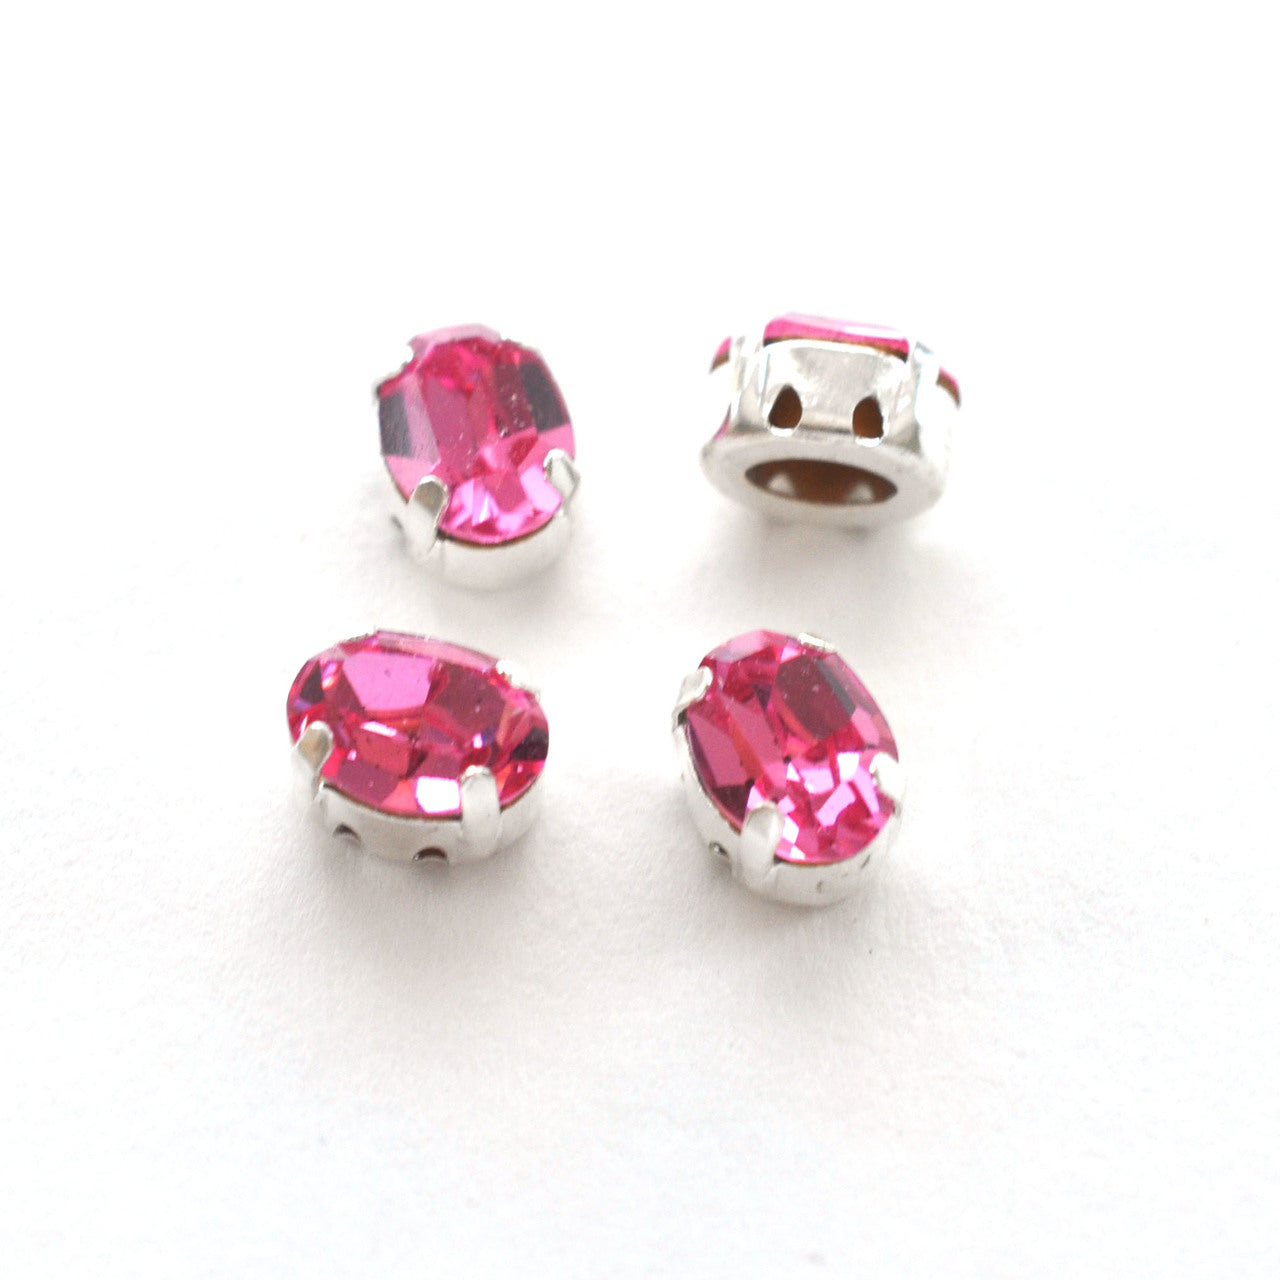 Rose 8x6mm Sew On Set Ovals - 4 Pieces